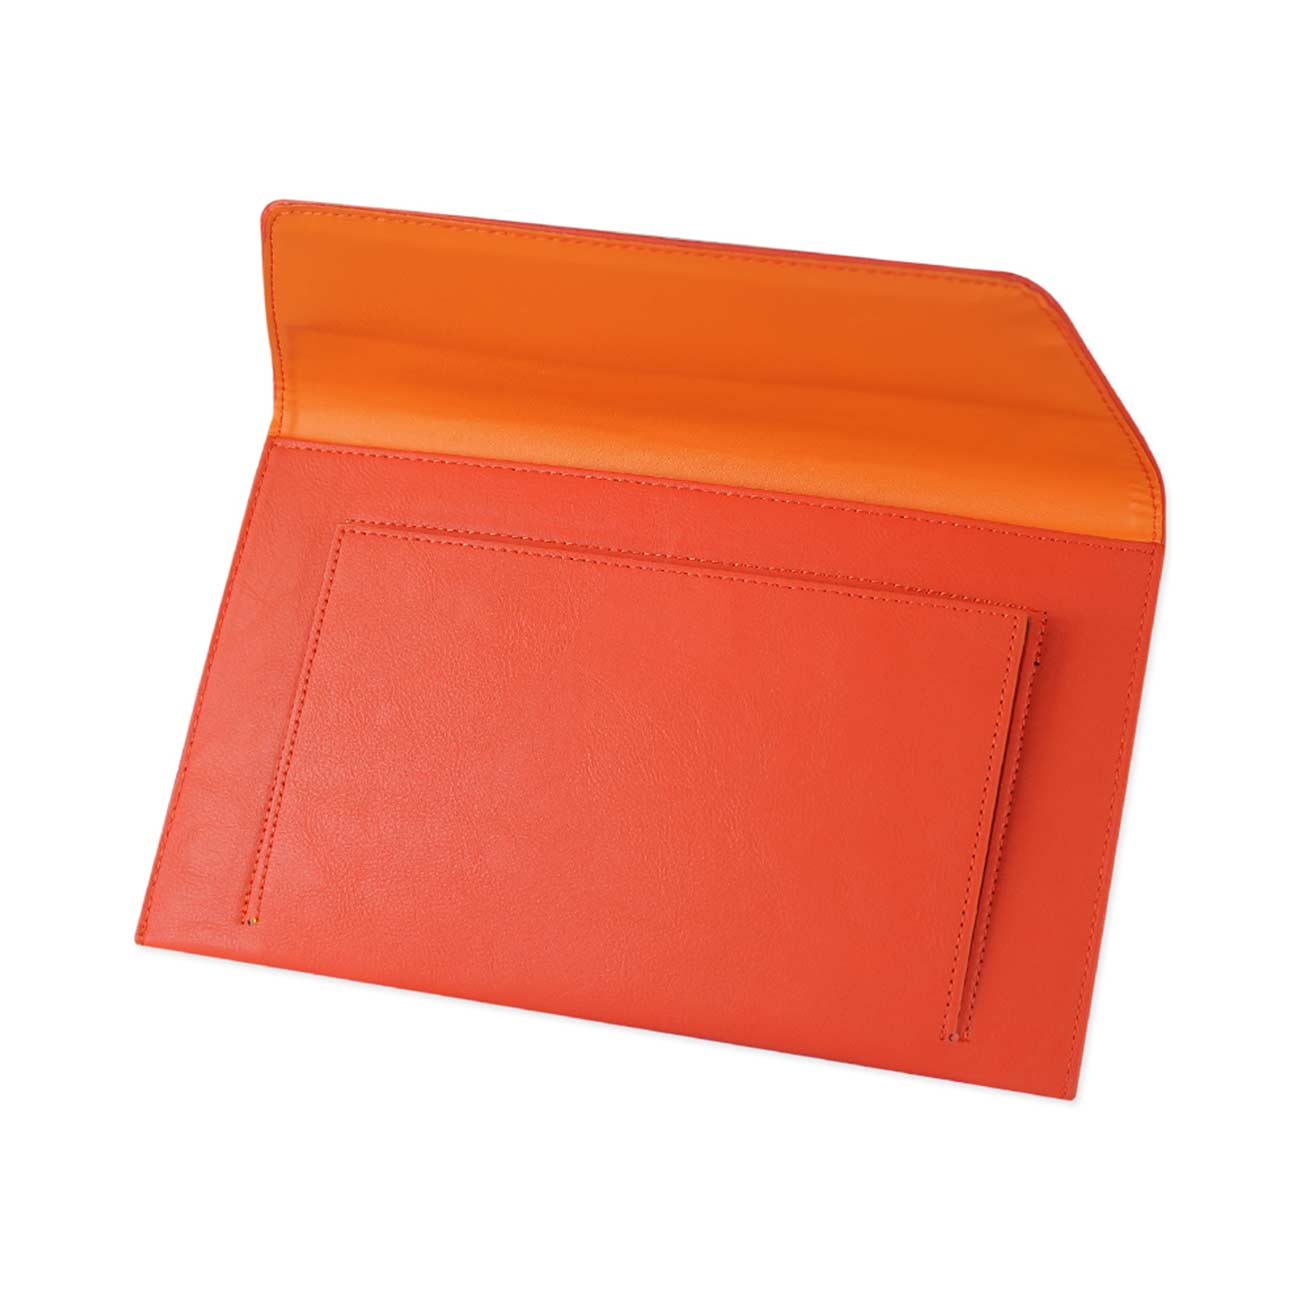 REIKO PREMIUM LEATHER CASE POUCH FOR 11.6INCHES IPADS AND TABLETS In ORANGE